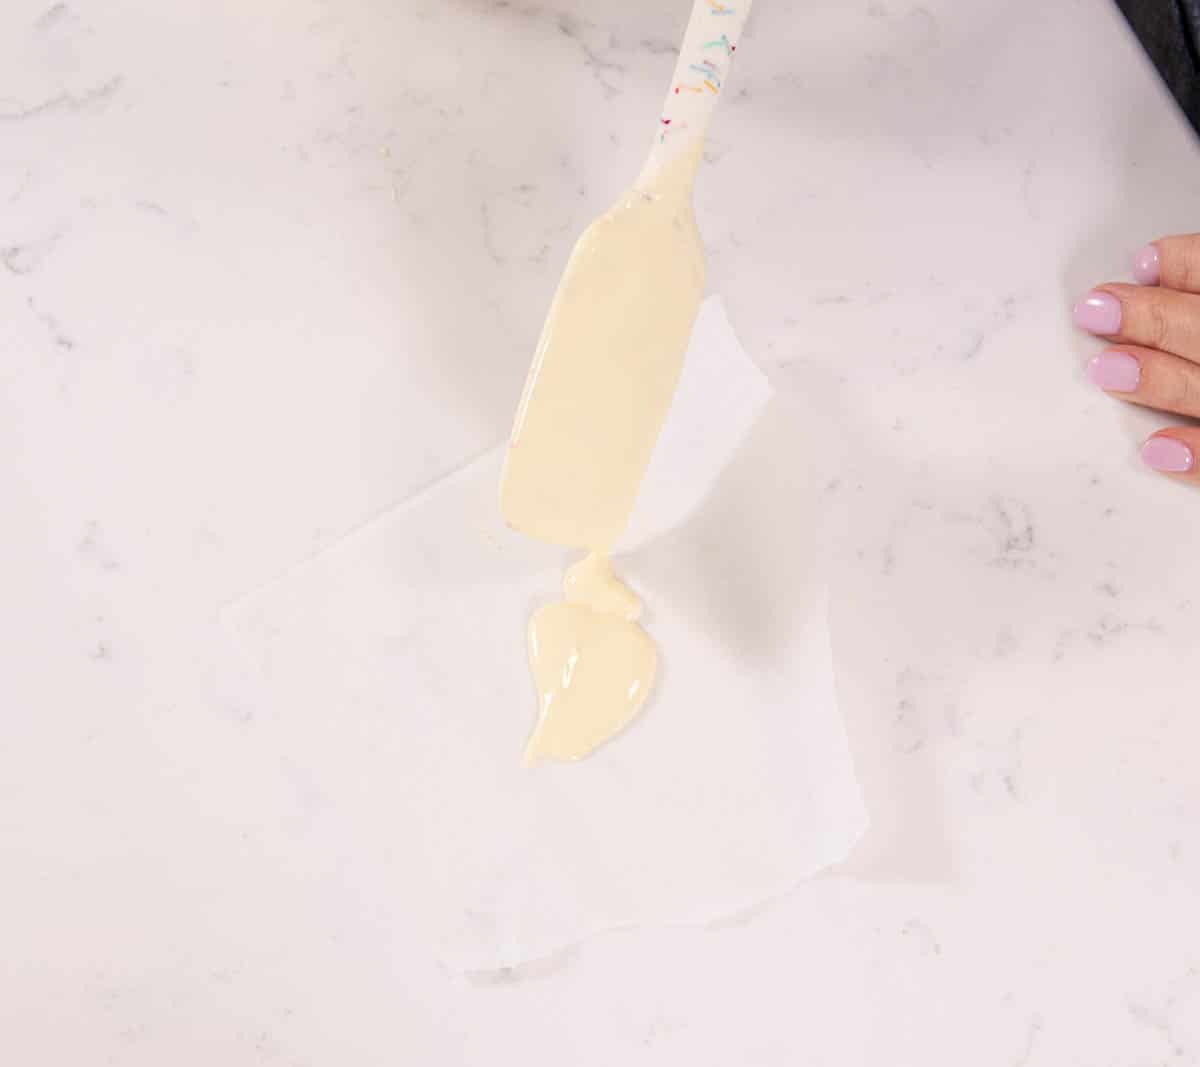 spatula spooning white chocolate onto parchment paper